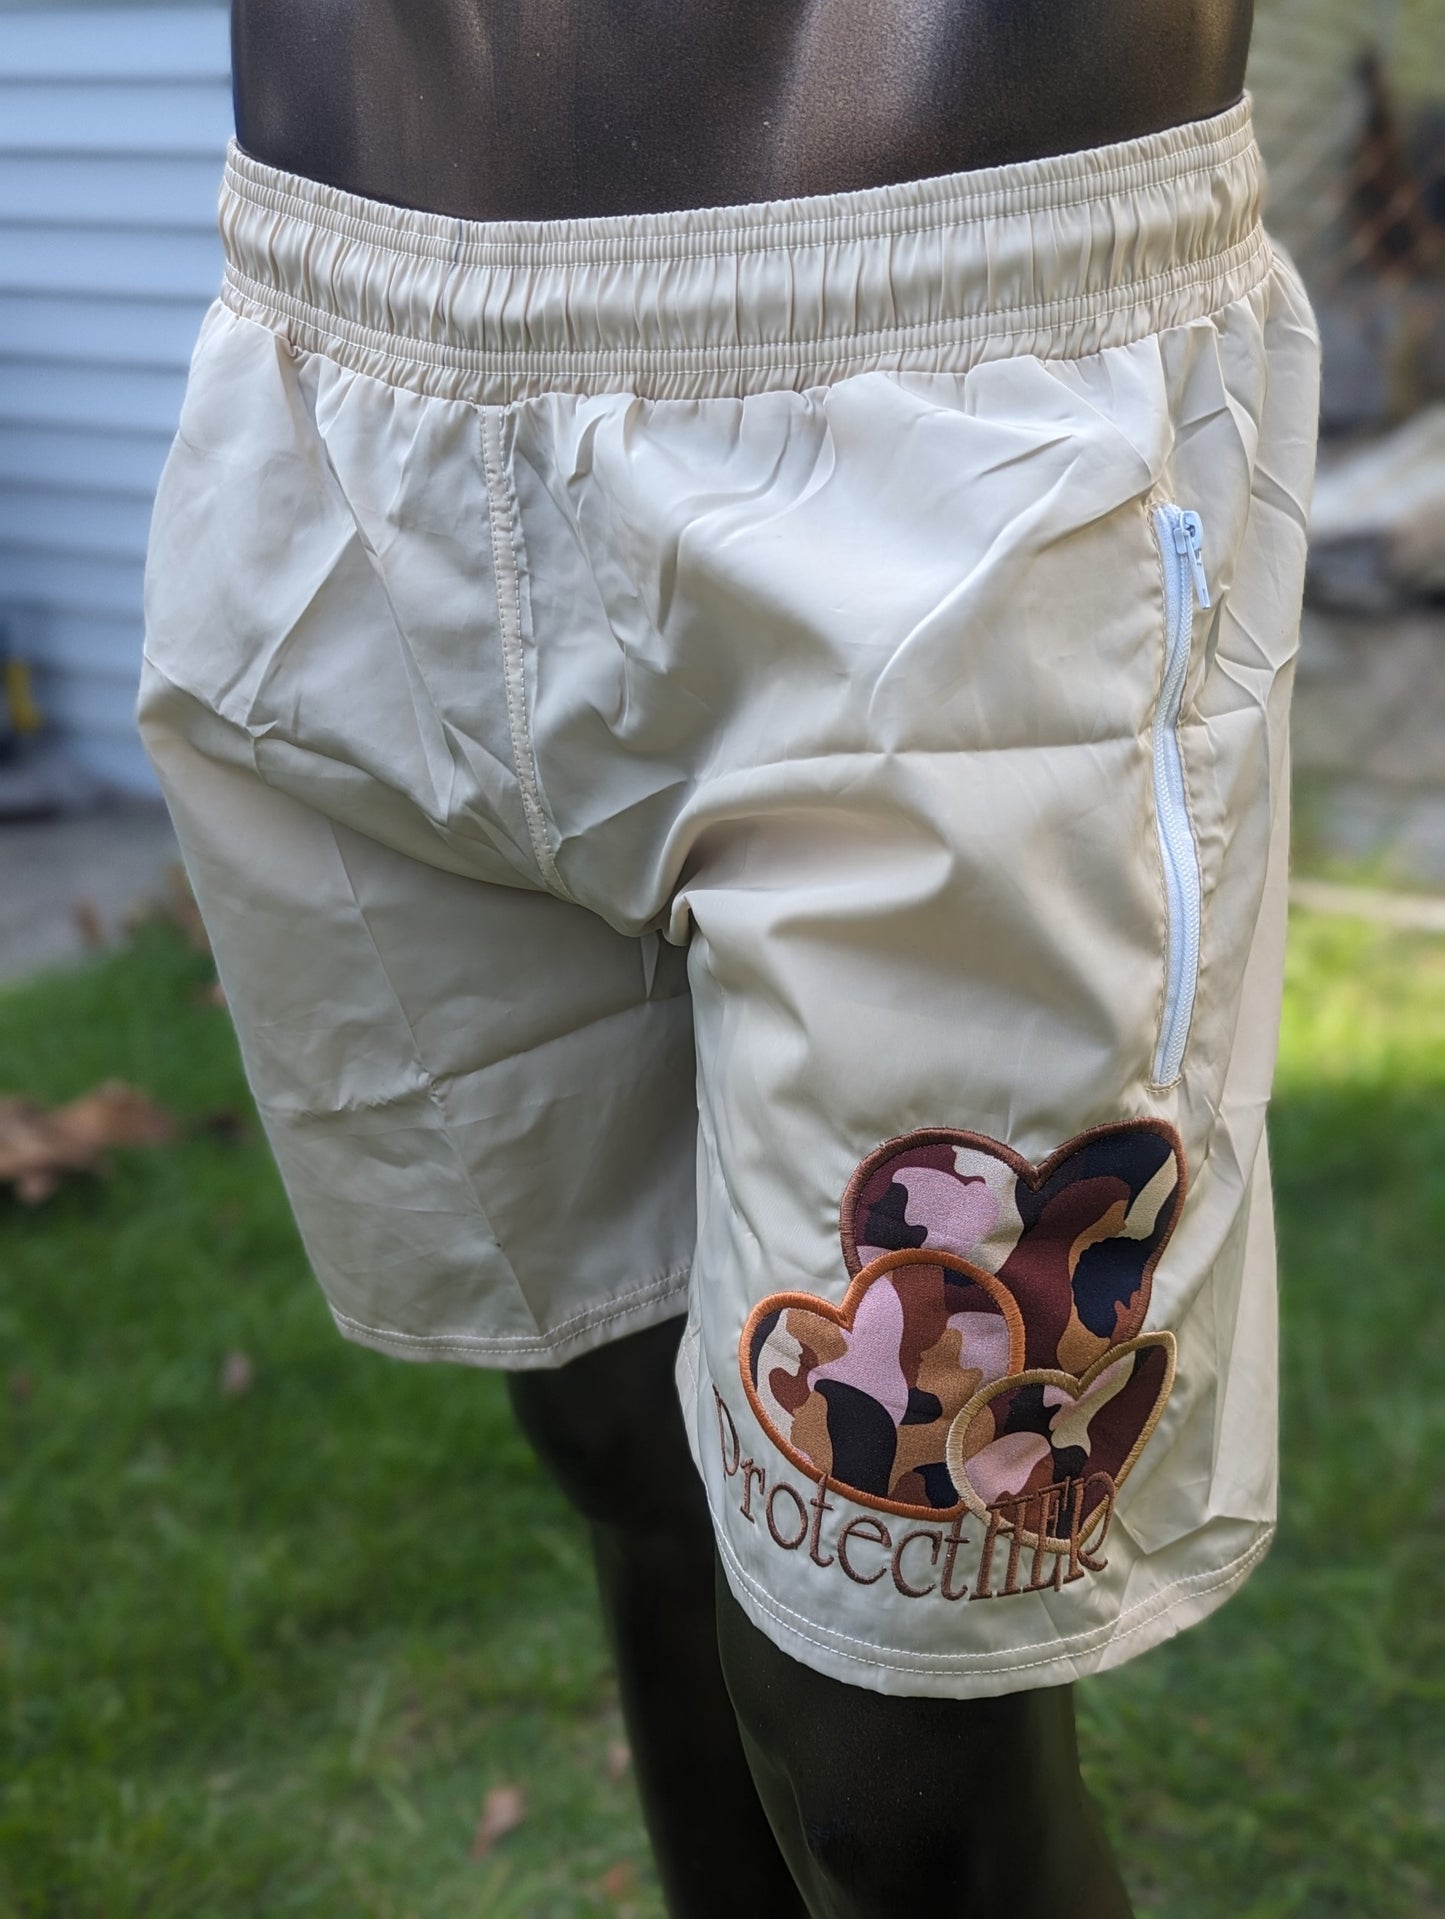 ProtectHER Shorts